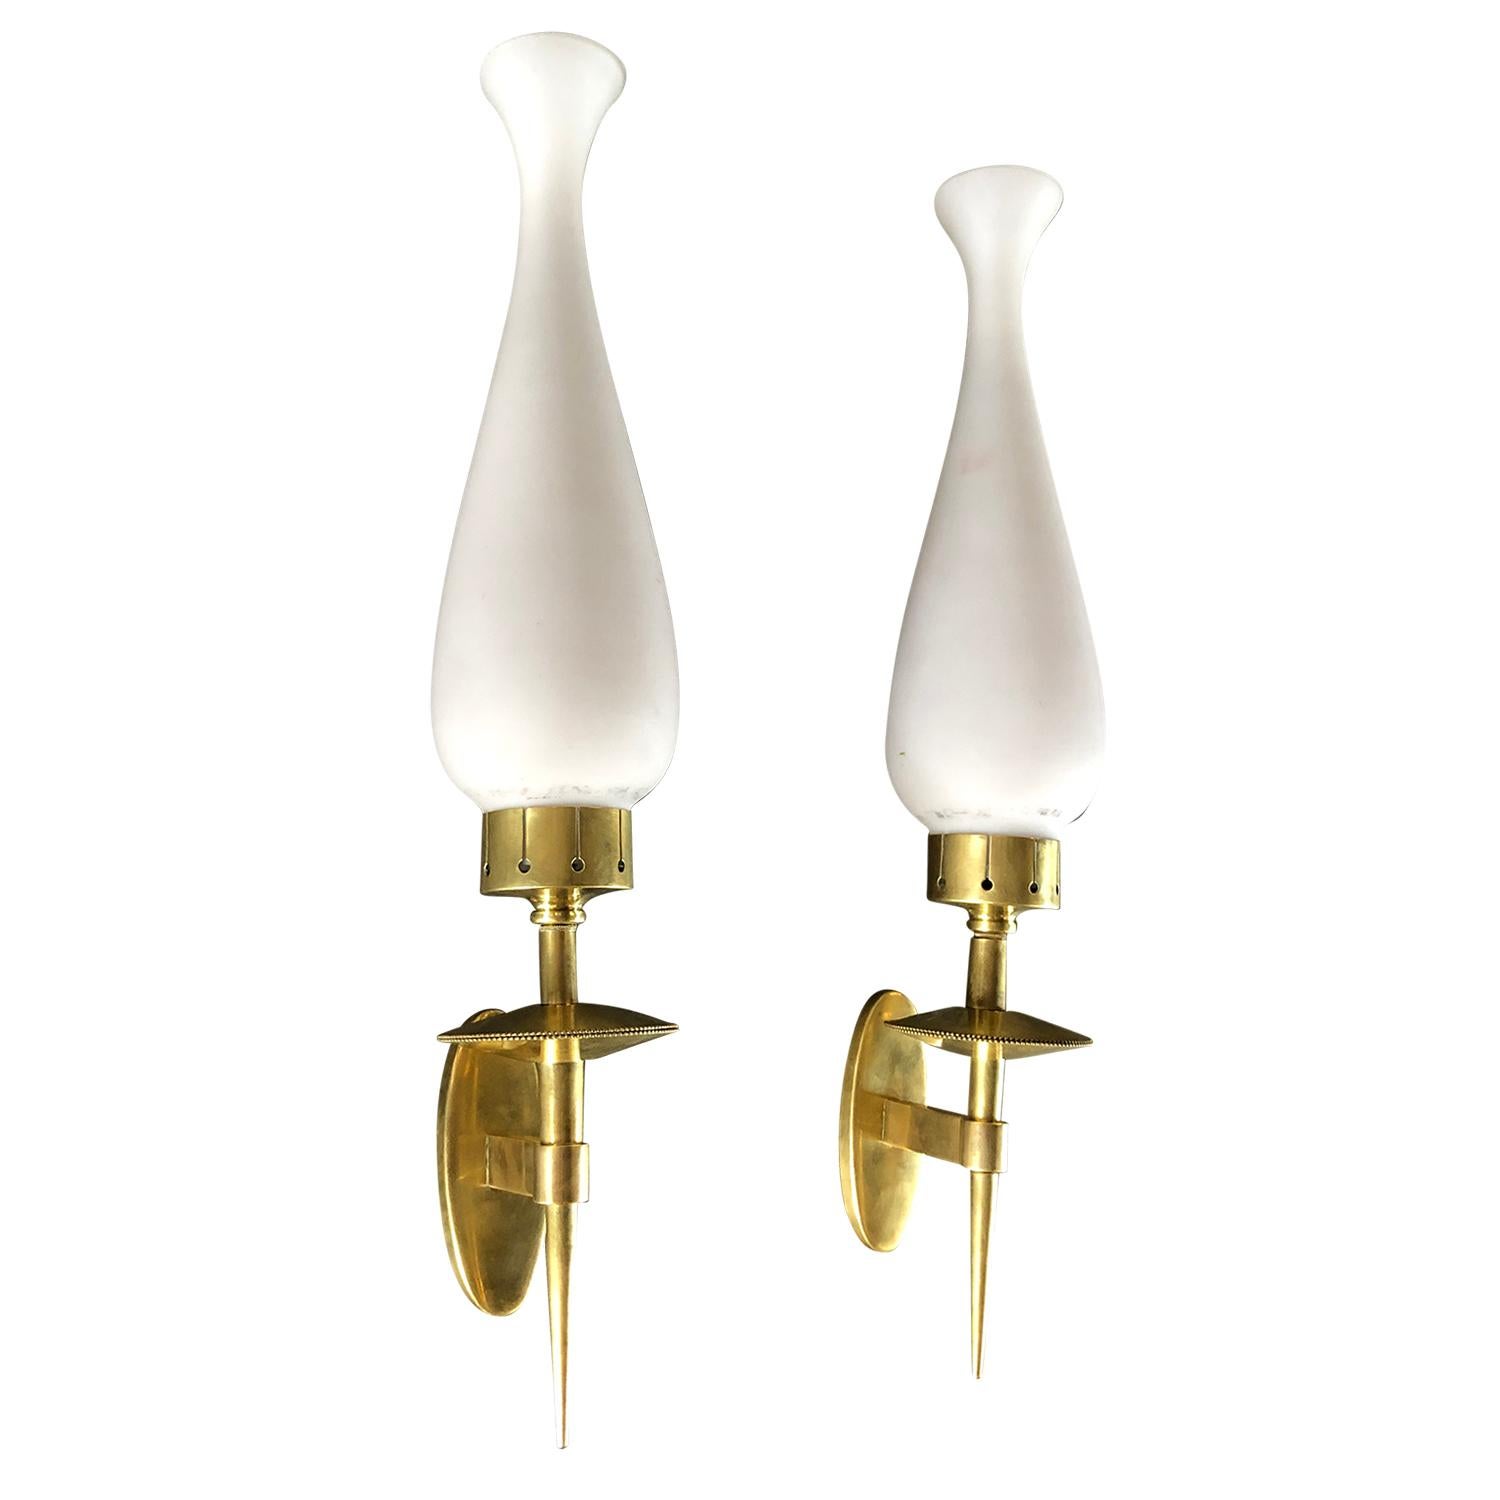 A vintage Mid-Century Modern Italian pair of wall sconces made of handcrafted brass, enhanced by very detailed decoration with two frosted opal glass shades, imitating a tulip, each is featuring a one light socket. Designed by Bruno Chiarini and